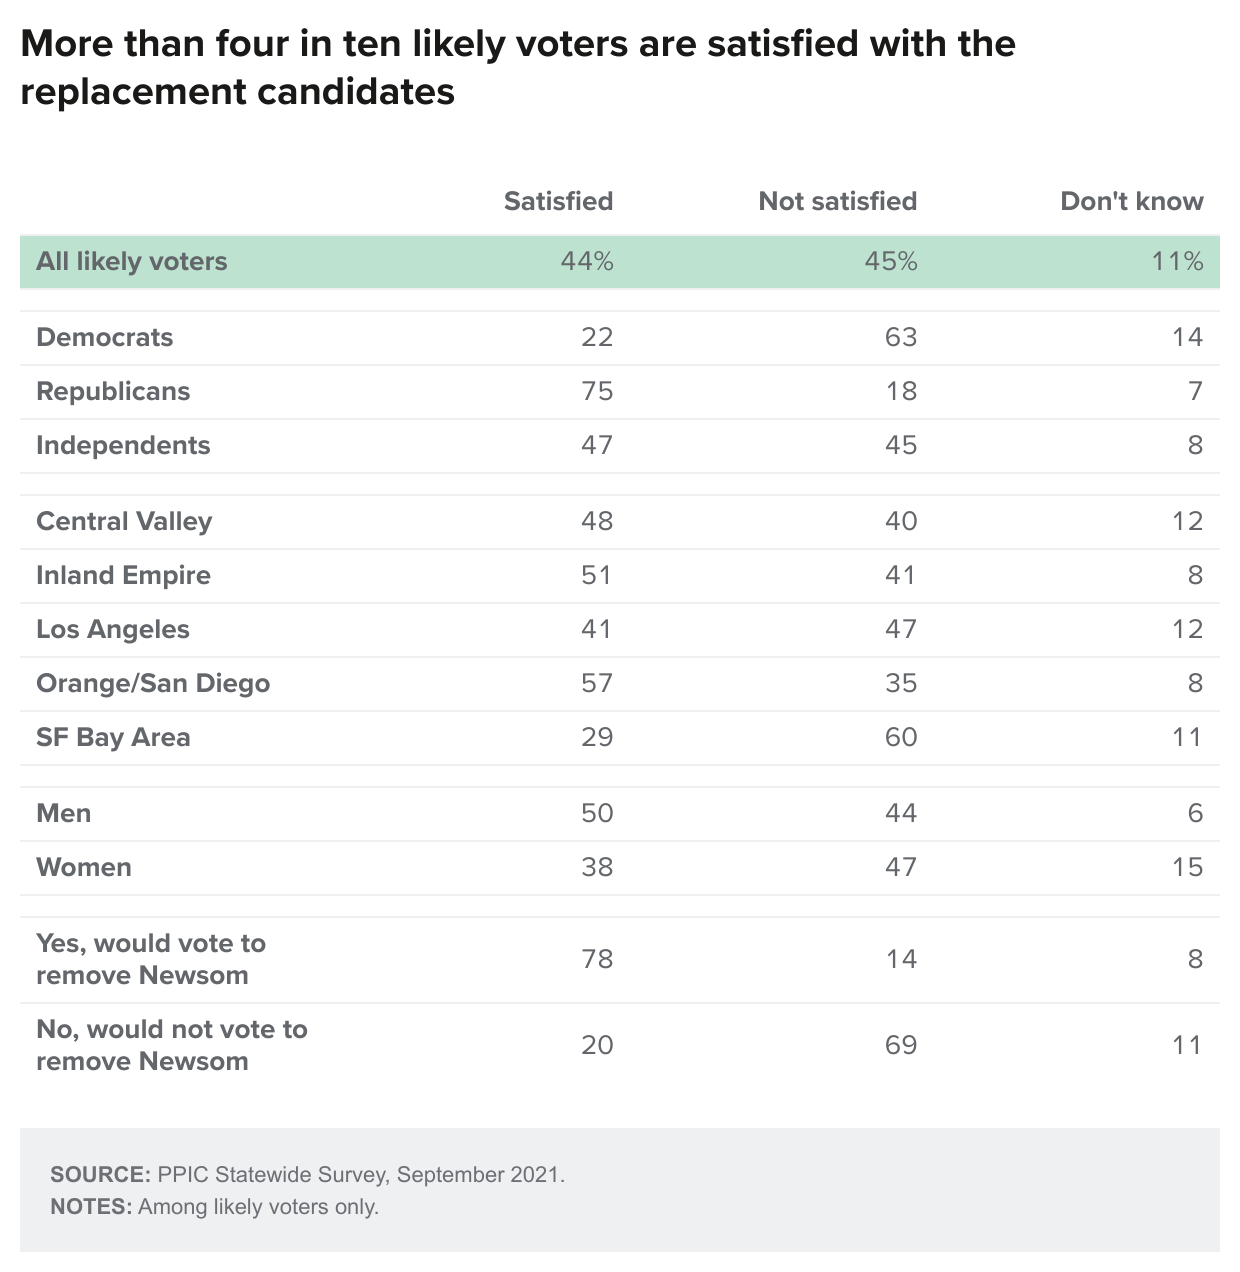 figure - More Than Four In Ten Likely Voters Are Satisfied With The Replacement Candidates